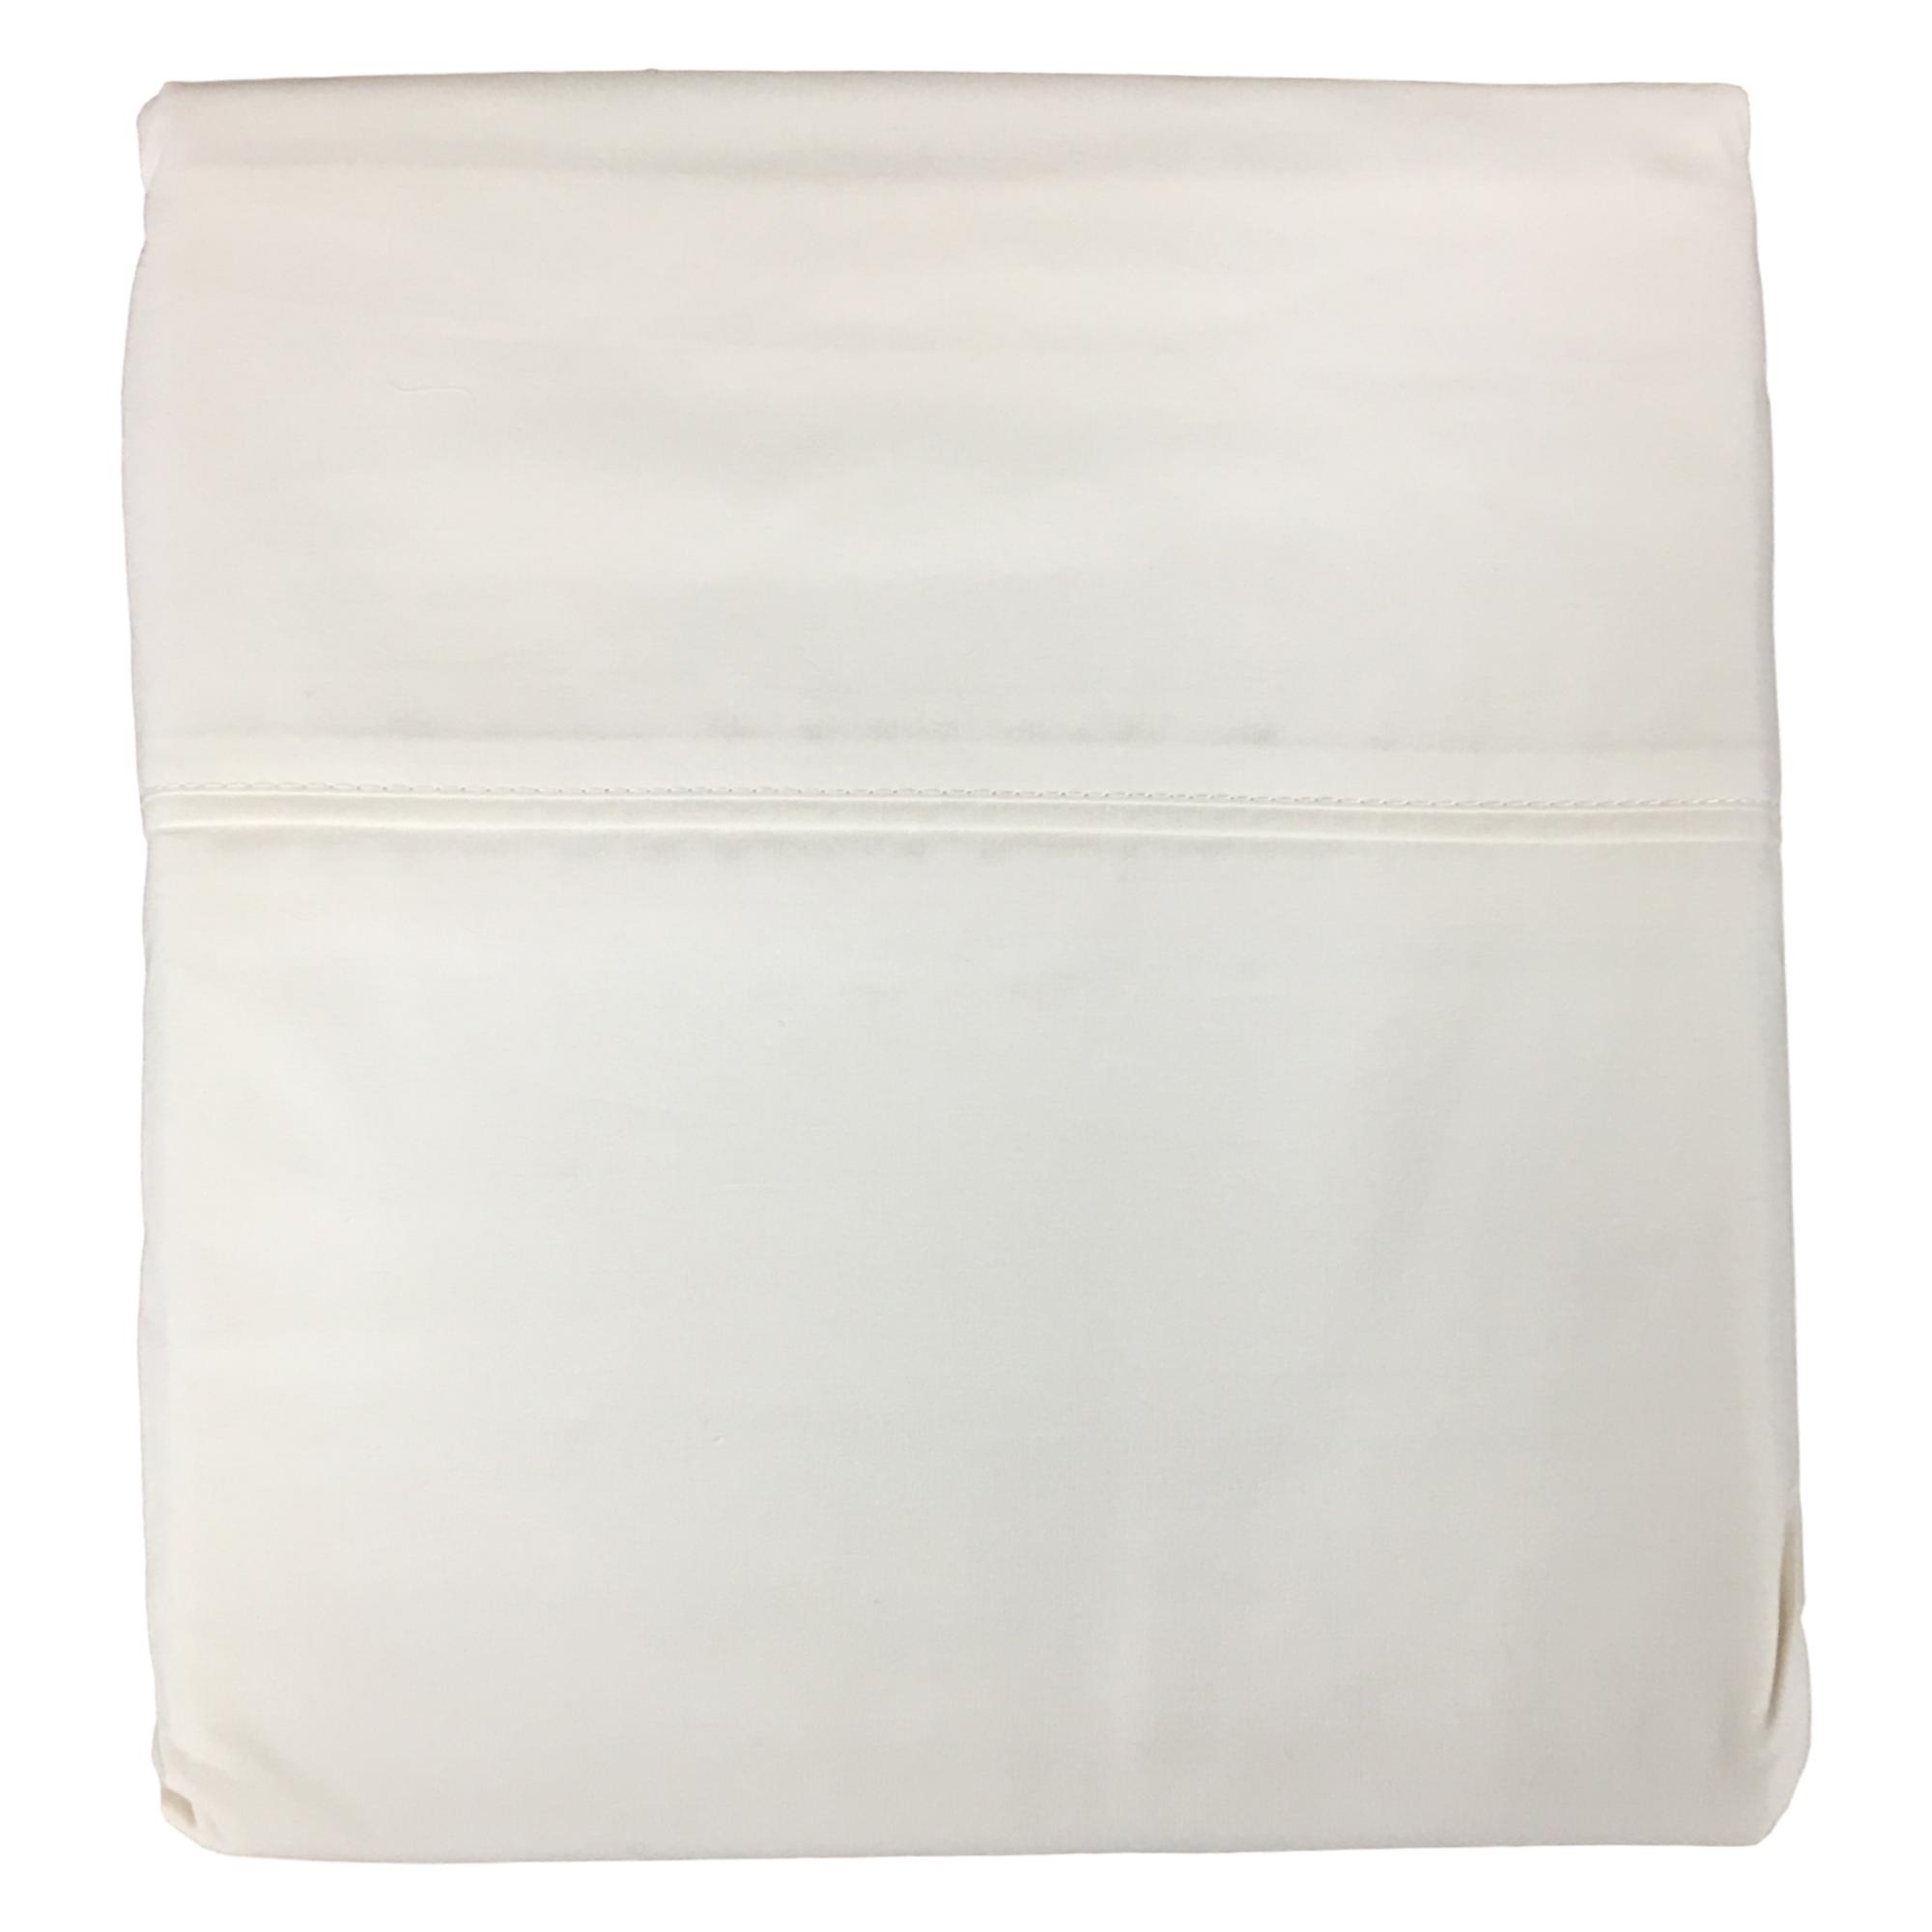 The Big One Ivory Cream Cotton Rich Sheet Set, 275 Thread Full Bed Sheets - image 1 of 2